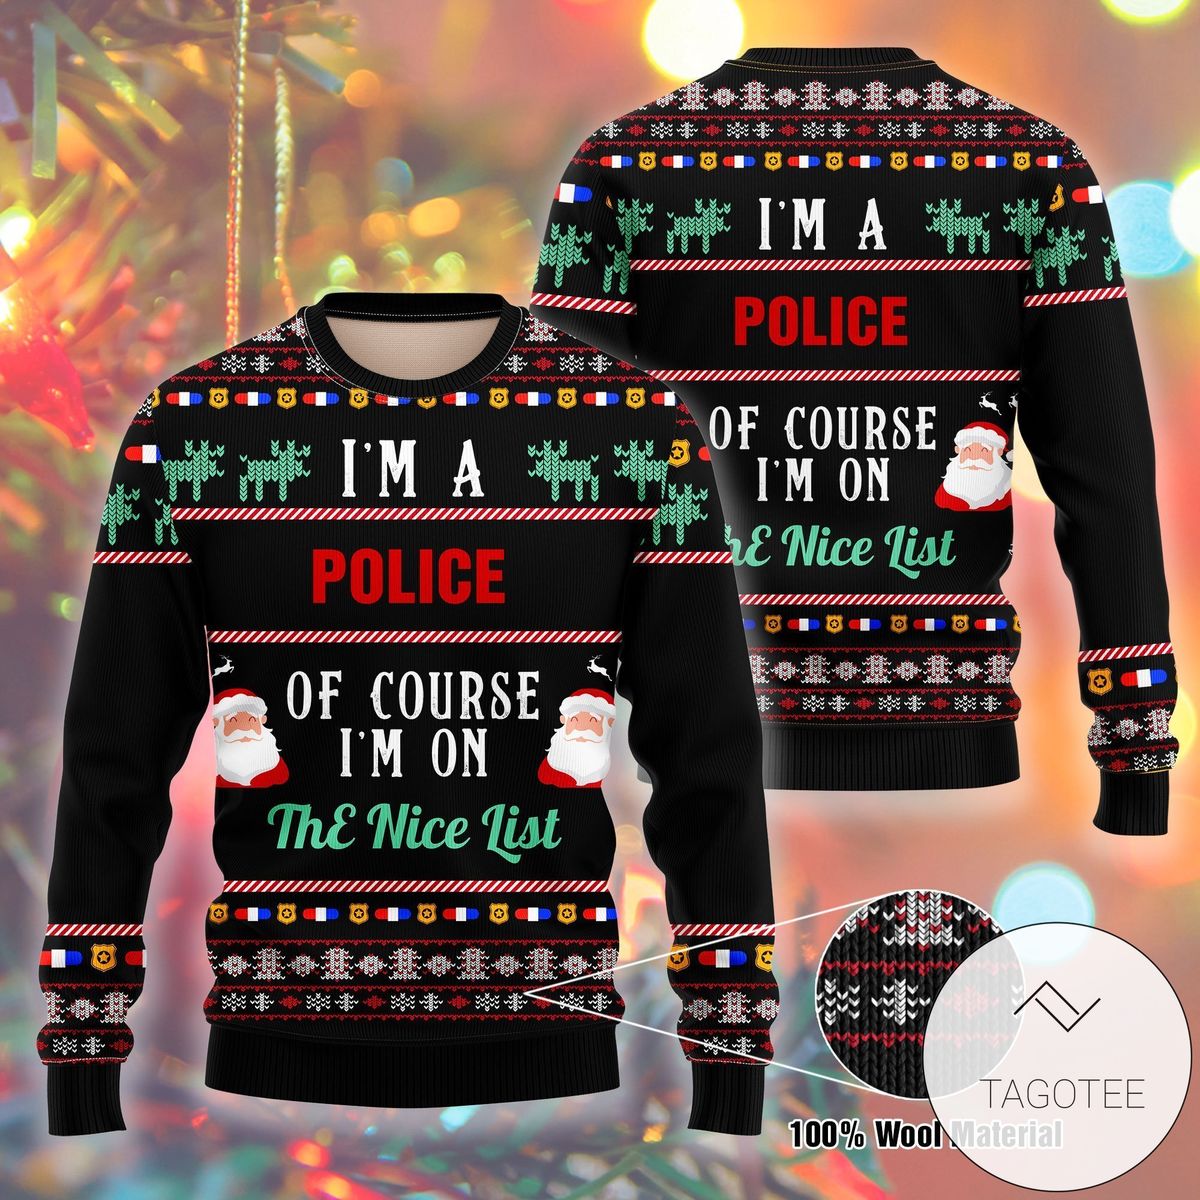 New 2021 I Am A Police Ugly Christmas Sweater